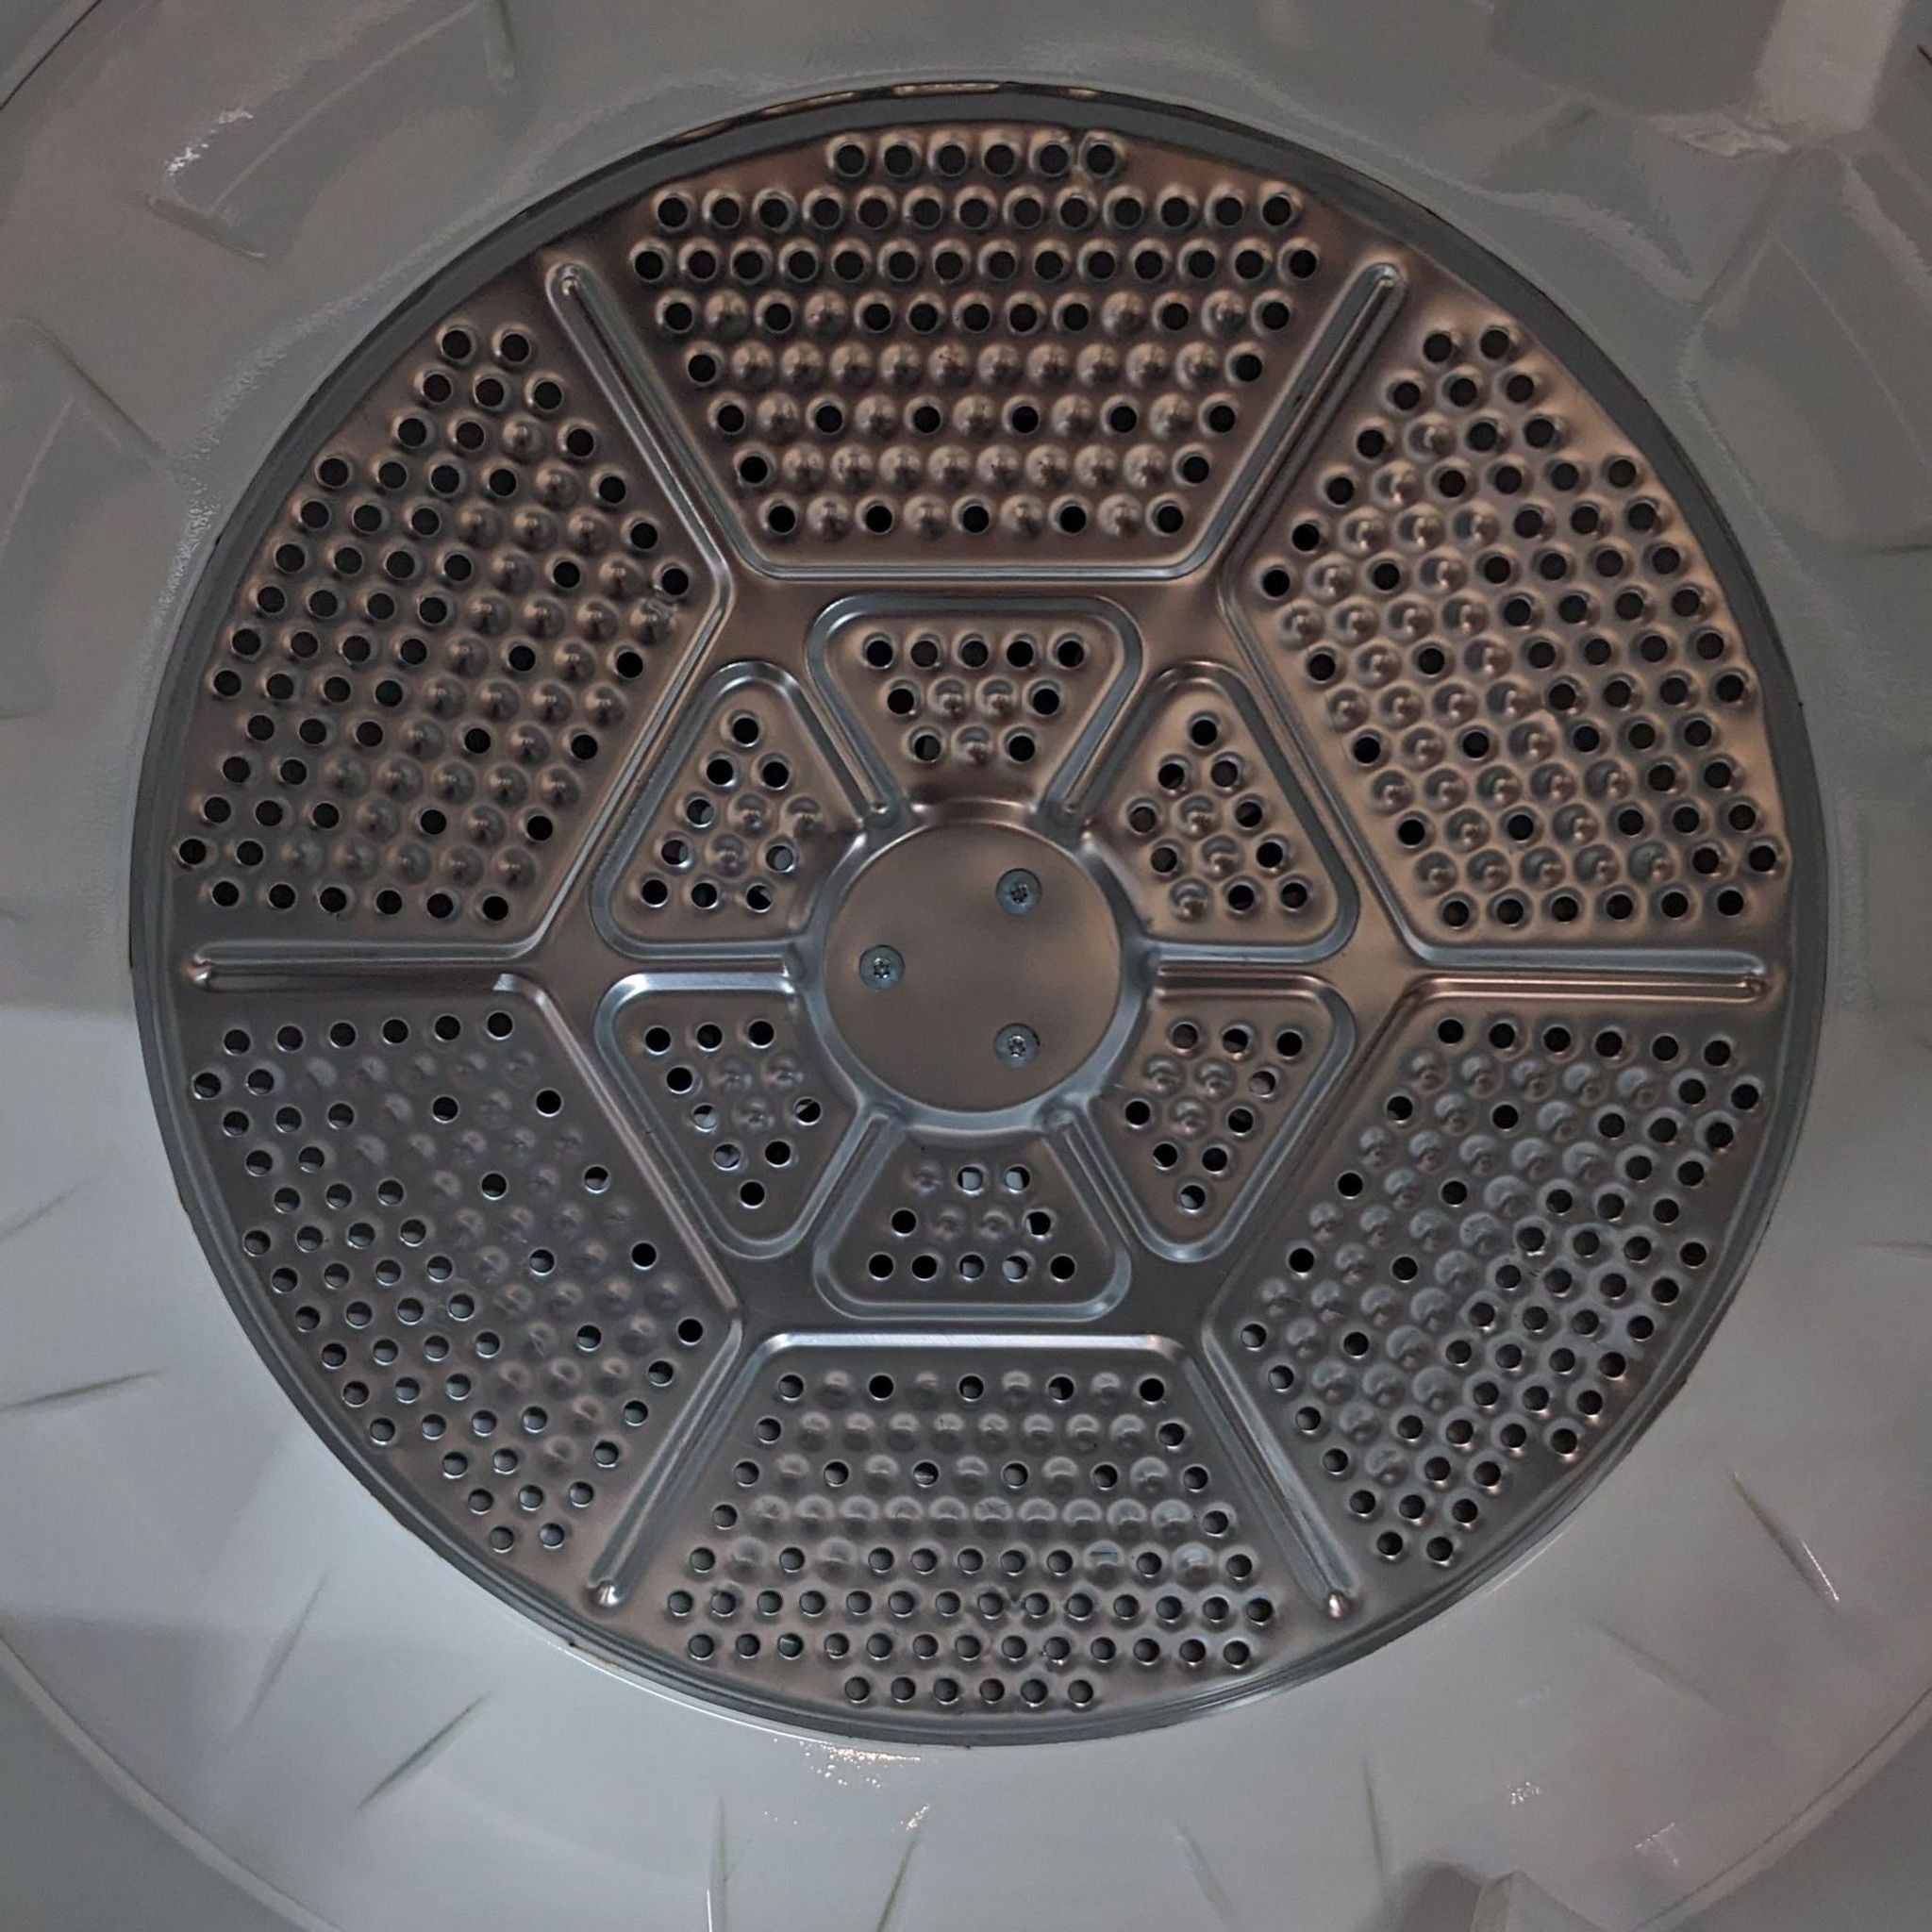 Interior view of a GE dryer drum with circular pattern and vent holes.